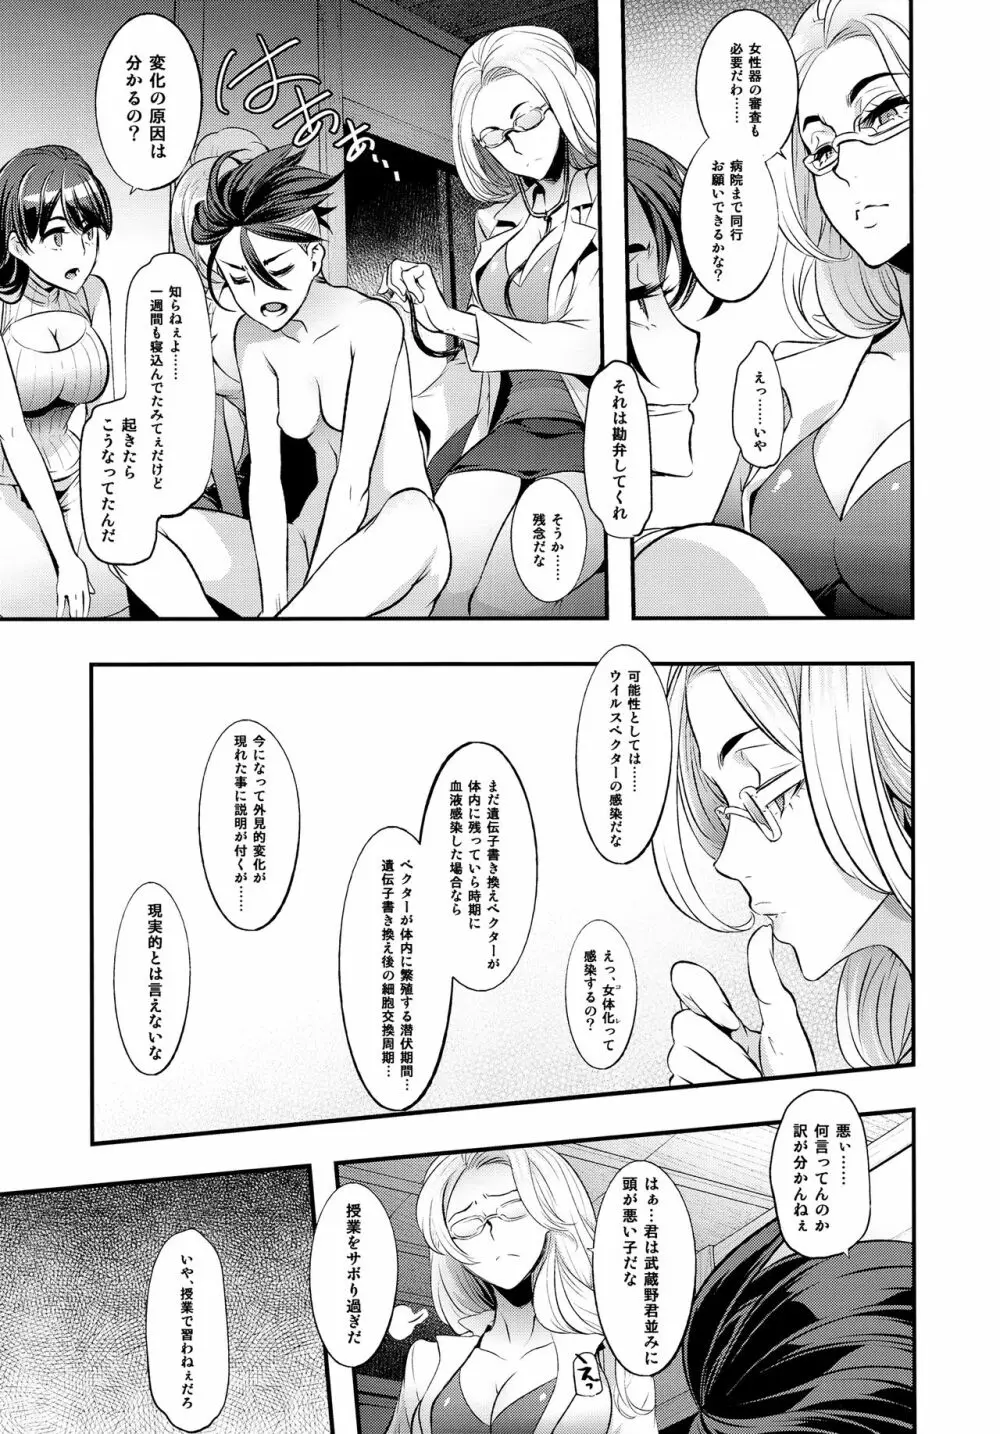 TSF物語 Append 4.0 - page6